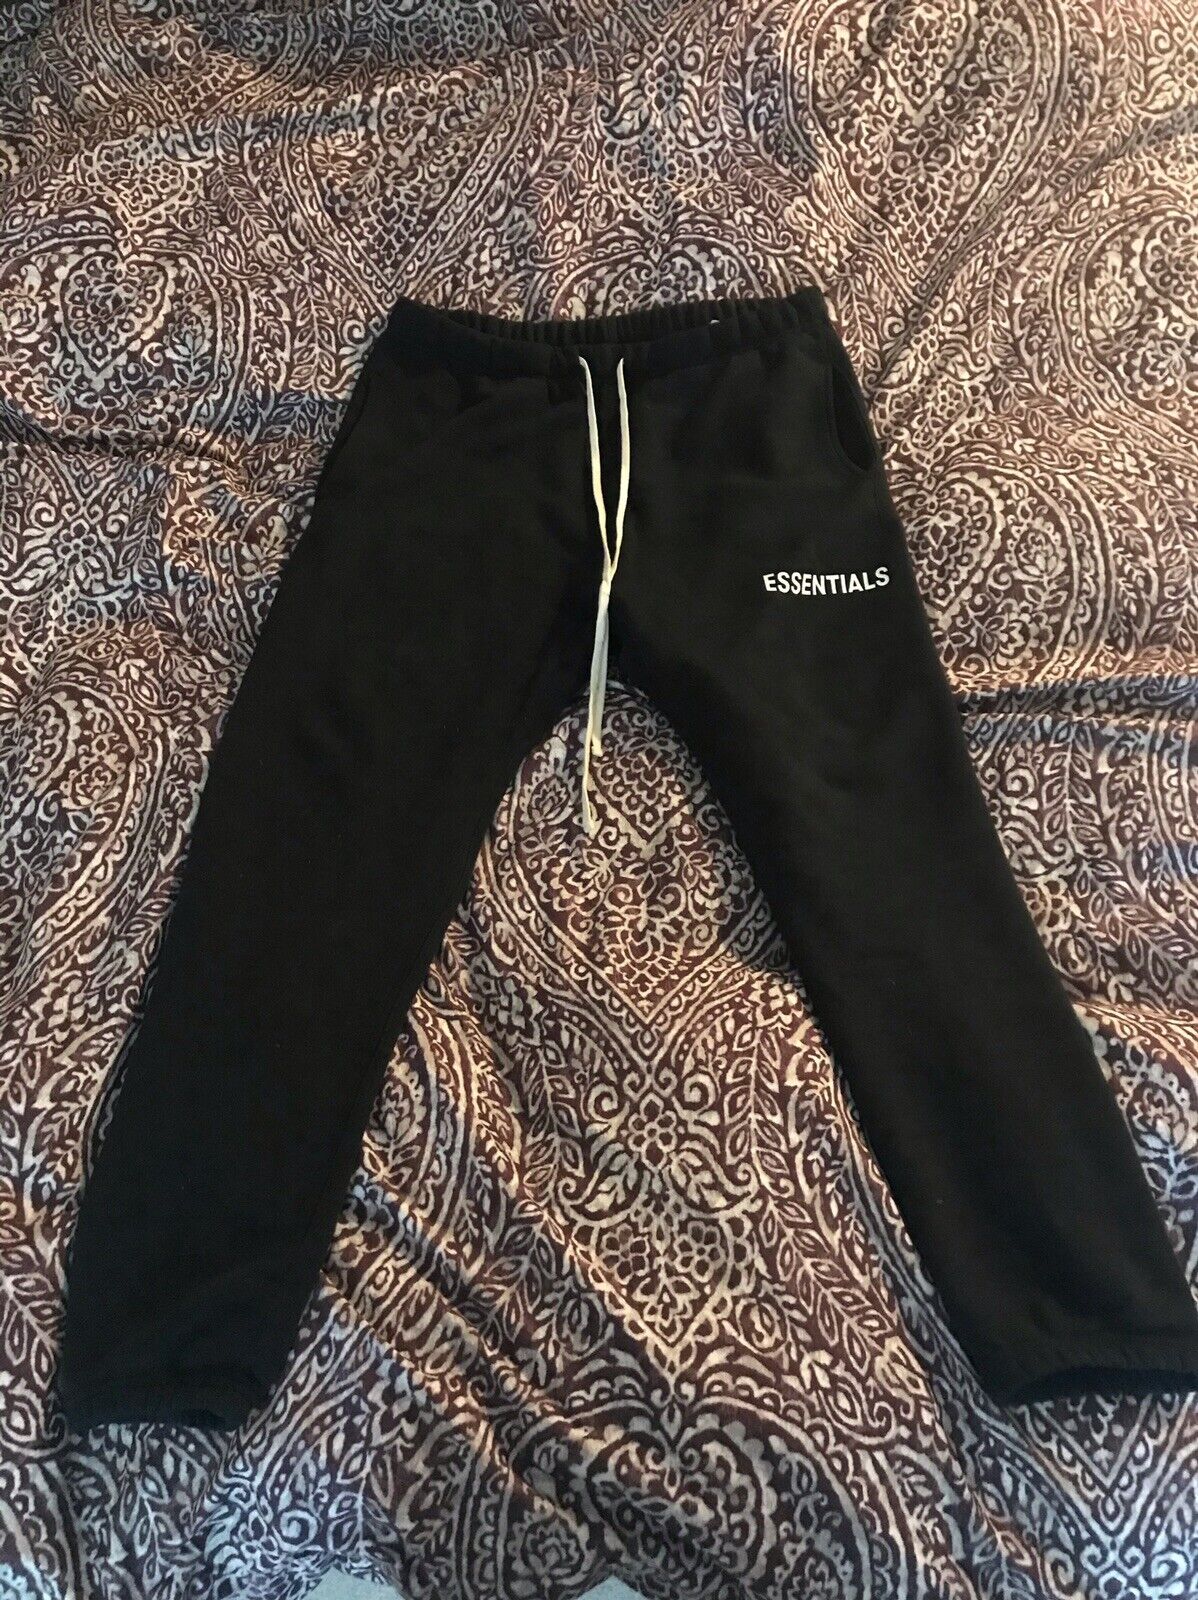 Fear Of God Essentials Sweatpants; Black White; Pre-Owned; XL